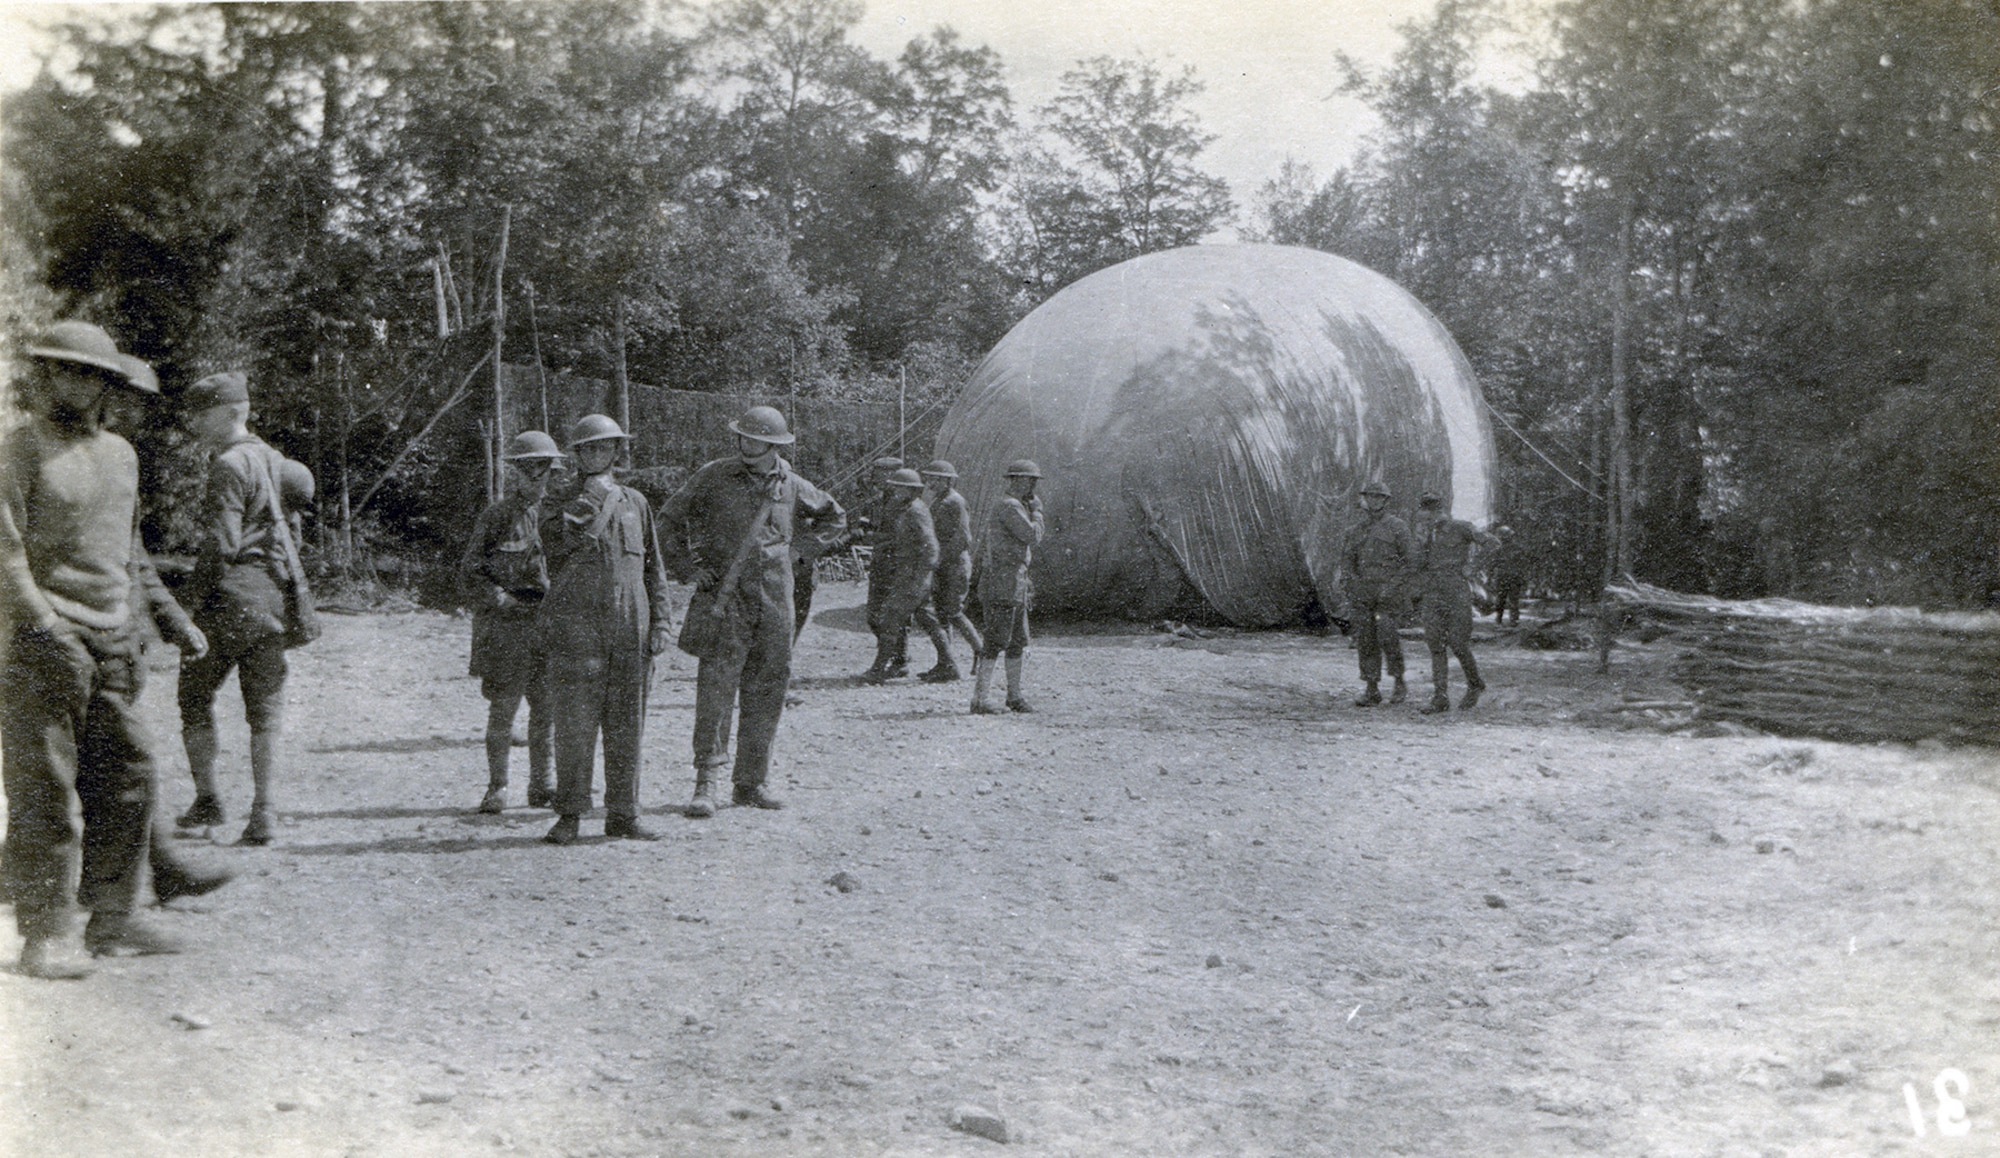 This collection of photos follows the 8th Balloon Company from training at Fort Omaha, Neb., to the Front. The 8th Balloon Company was one of 17 balloon companies to see combat in World War I. This photo shows a balloon in bed at Toul, France. (U.S. Air Force photo)